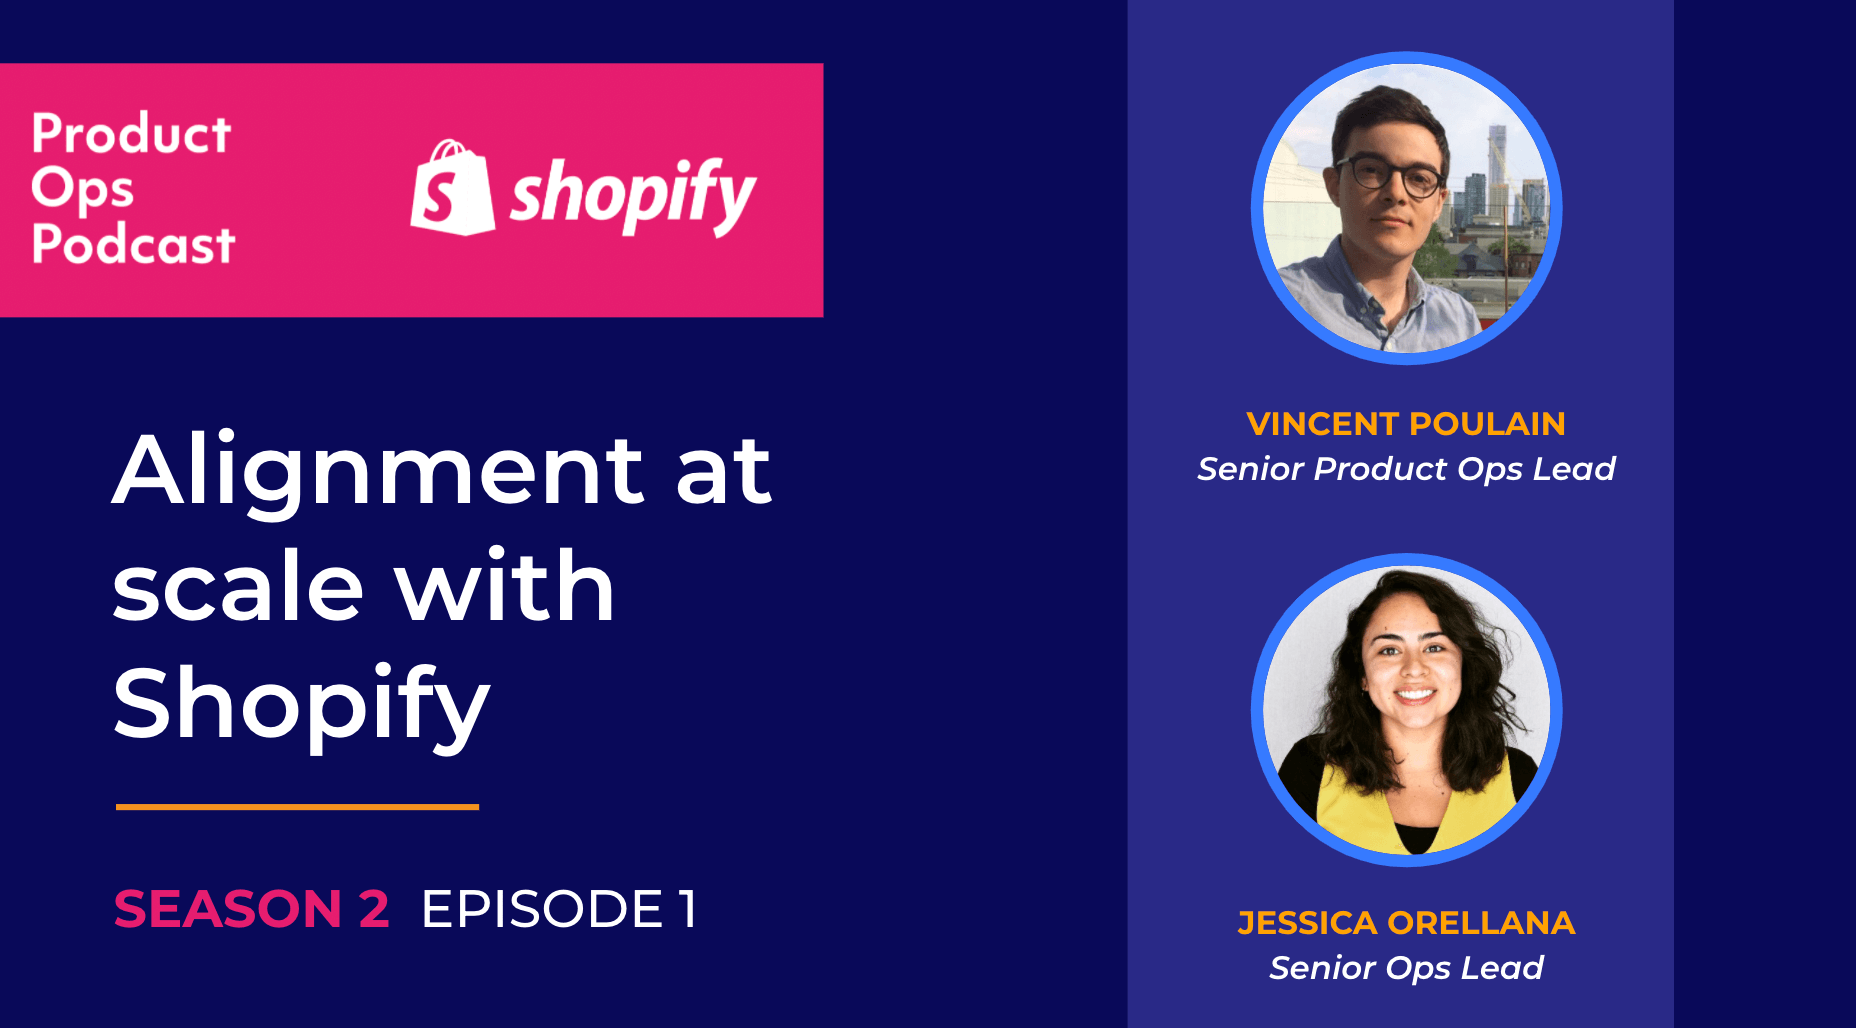 Alignment at scale, with Shopify